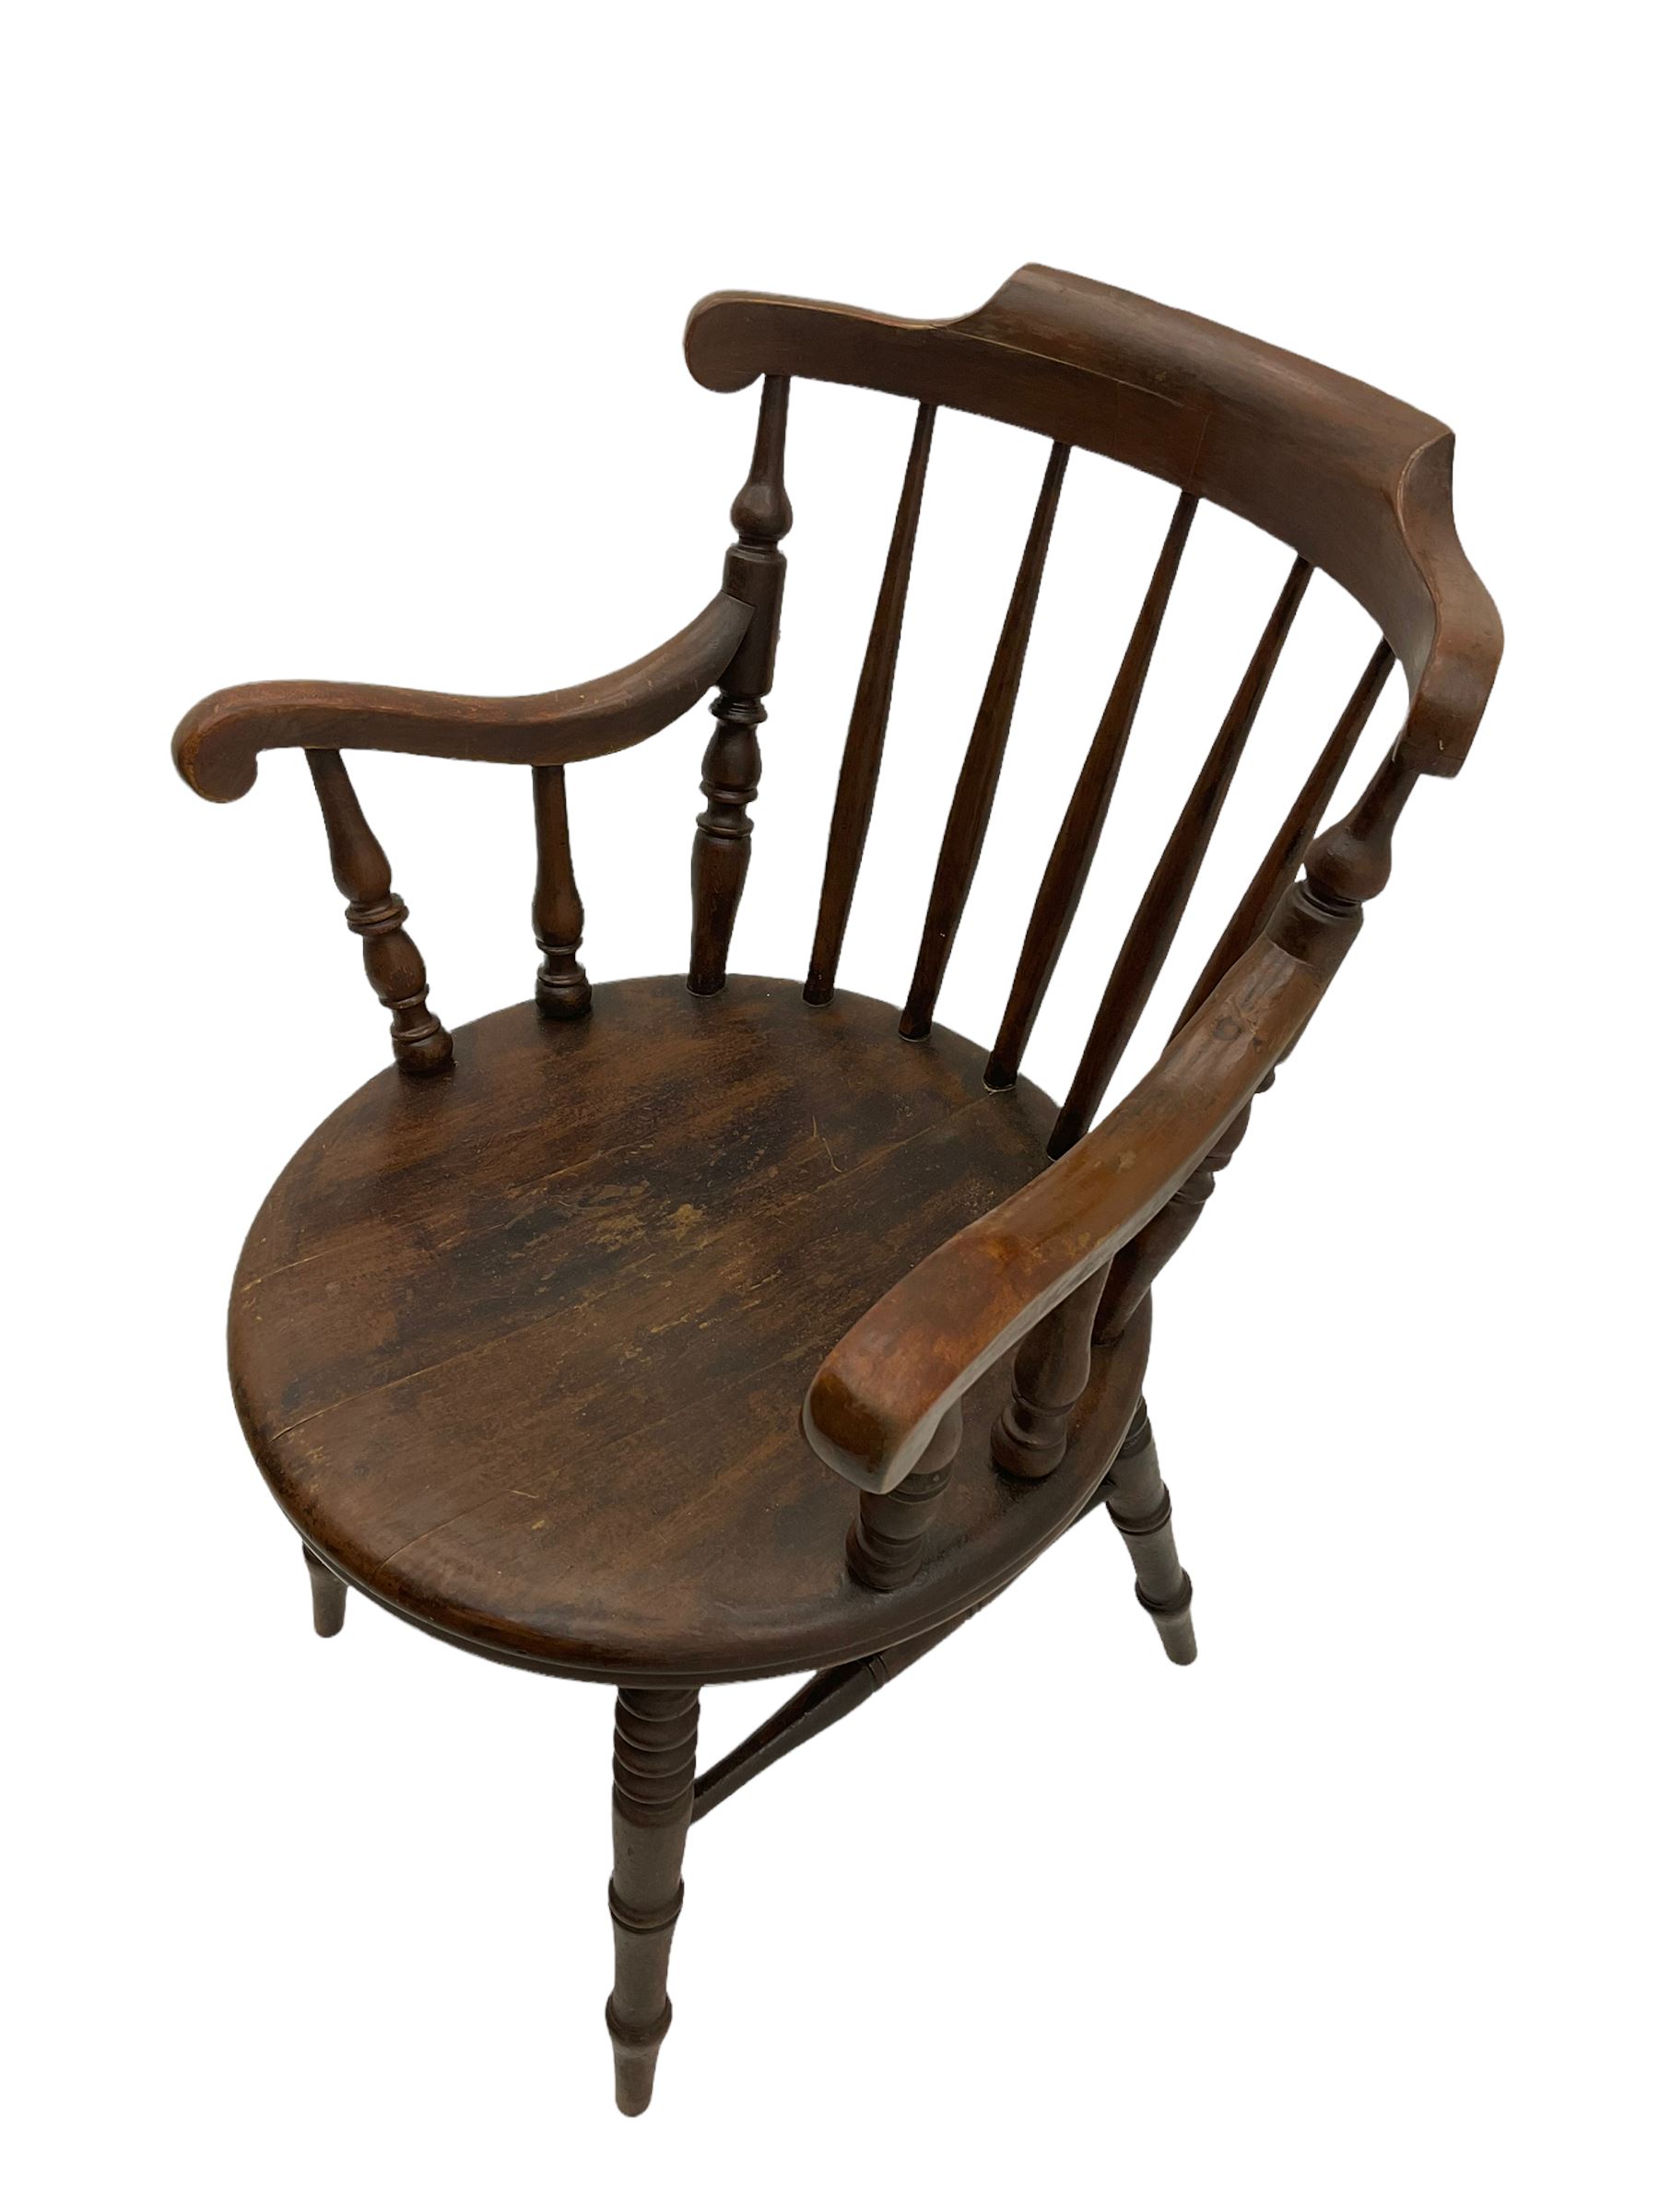 Late 19th century stained beech 'Penny' chair with "Ibex" label underneath - Image 2 of 7